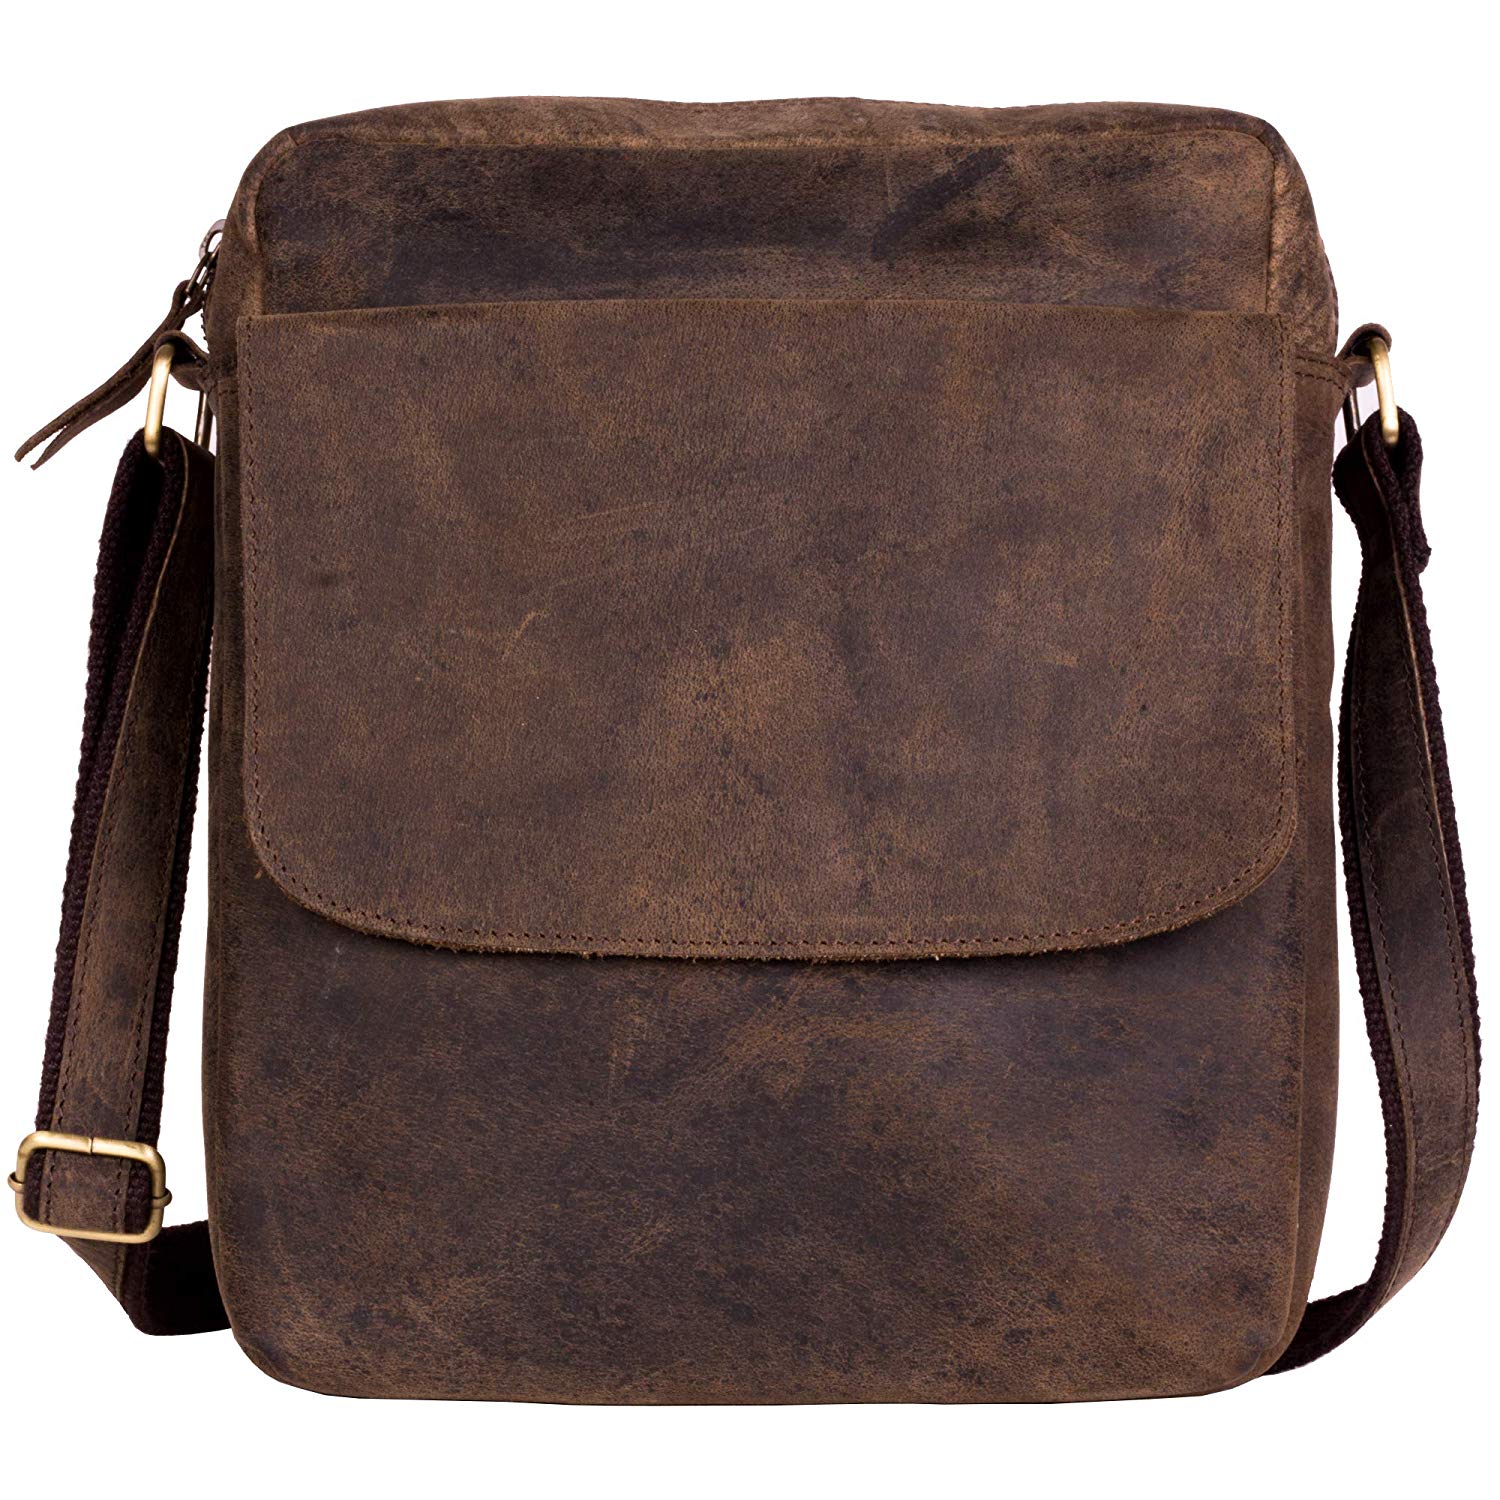 11 Inch Brando Leather Messenger Bag in Brown